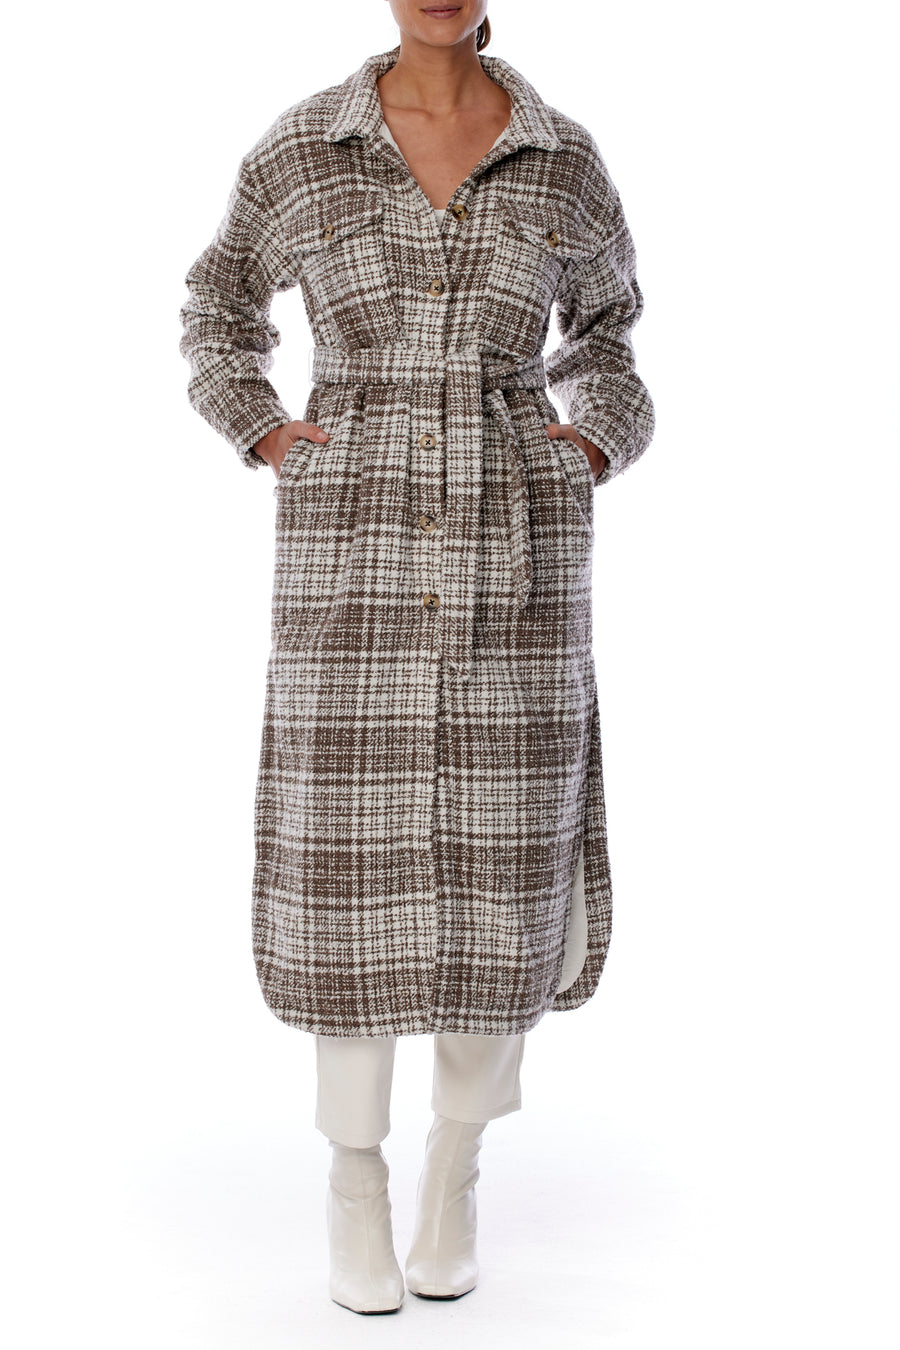 midi length, button up coco and white plaid jacket with shirttail hem and waist tie